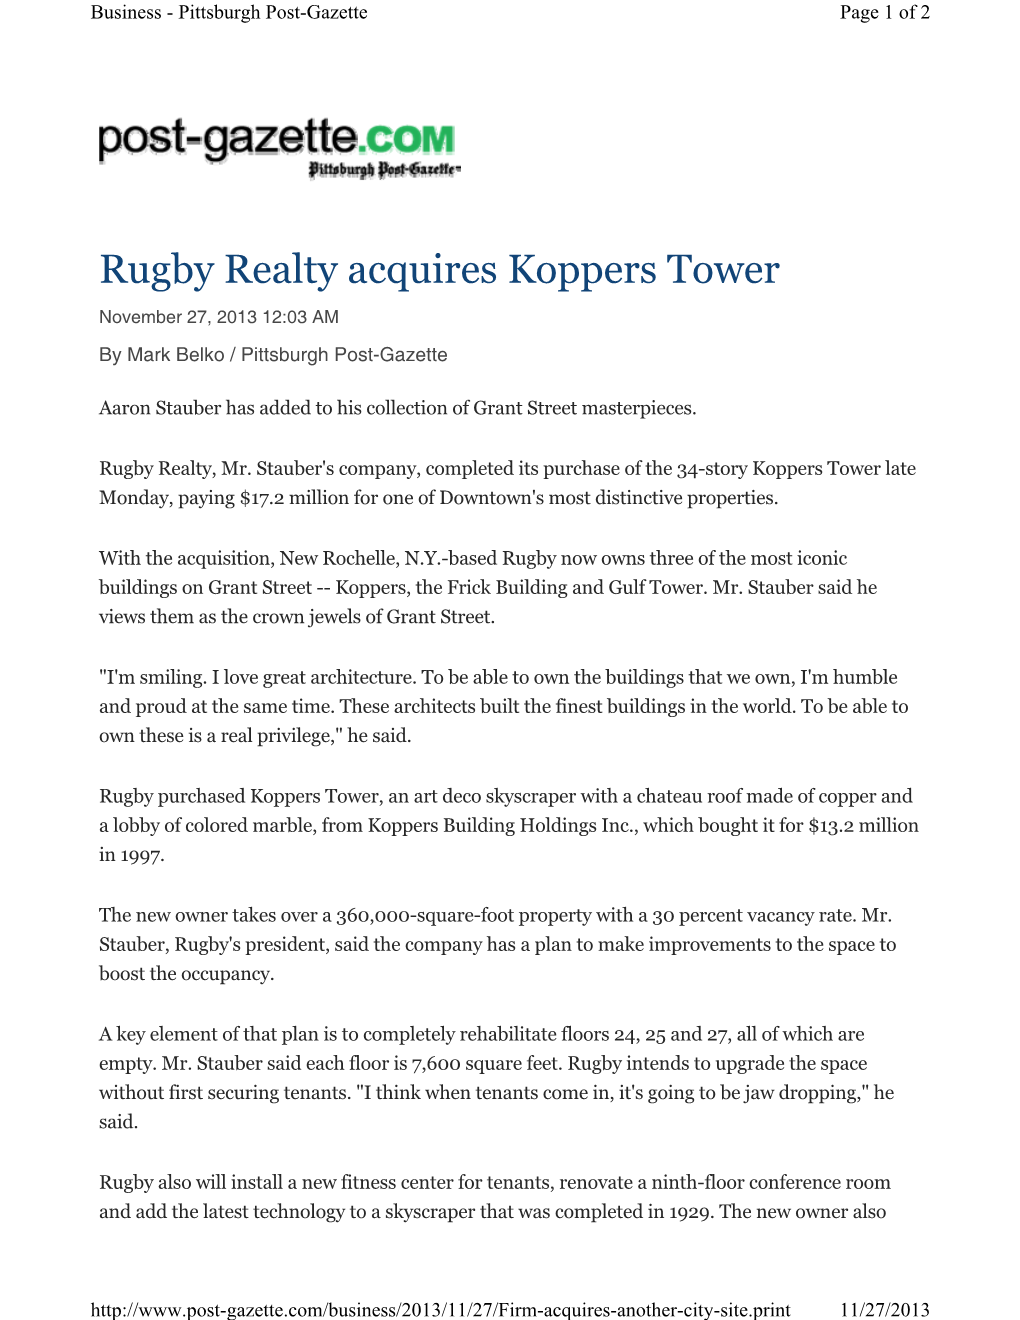 Rugby Realty Acquires Koppers Tower November 27, 2013 12:03 AM by Mark Belko / Pittsburgh Post-Gazette